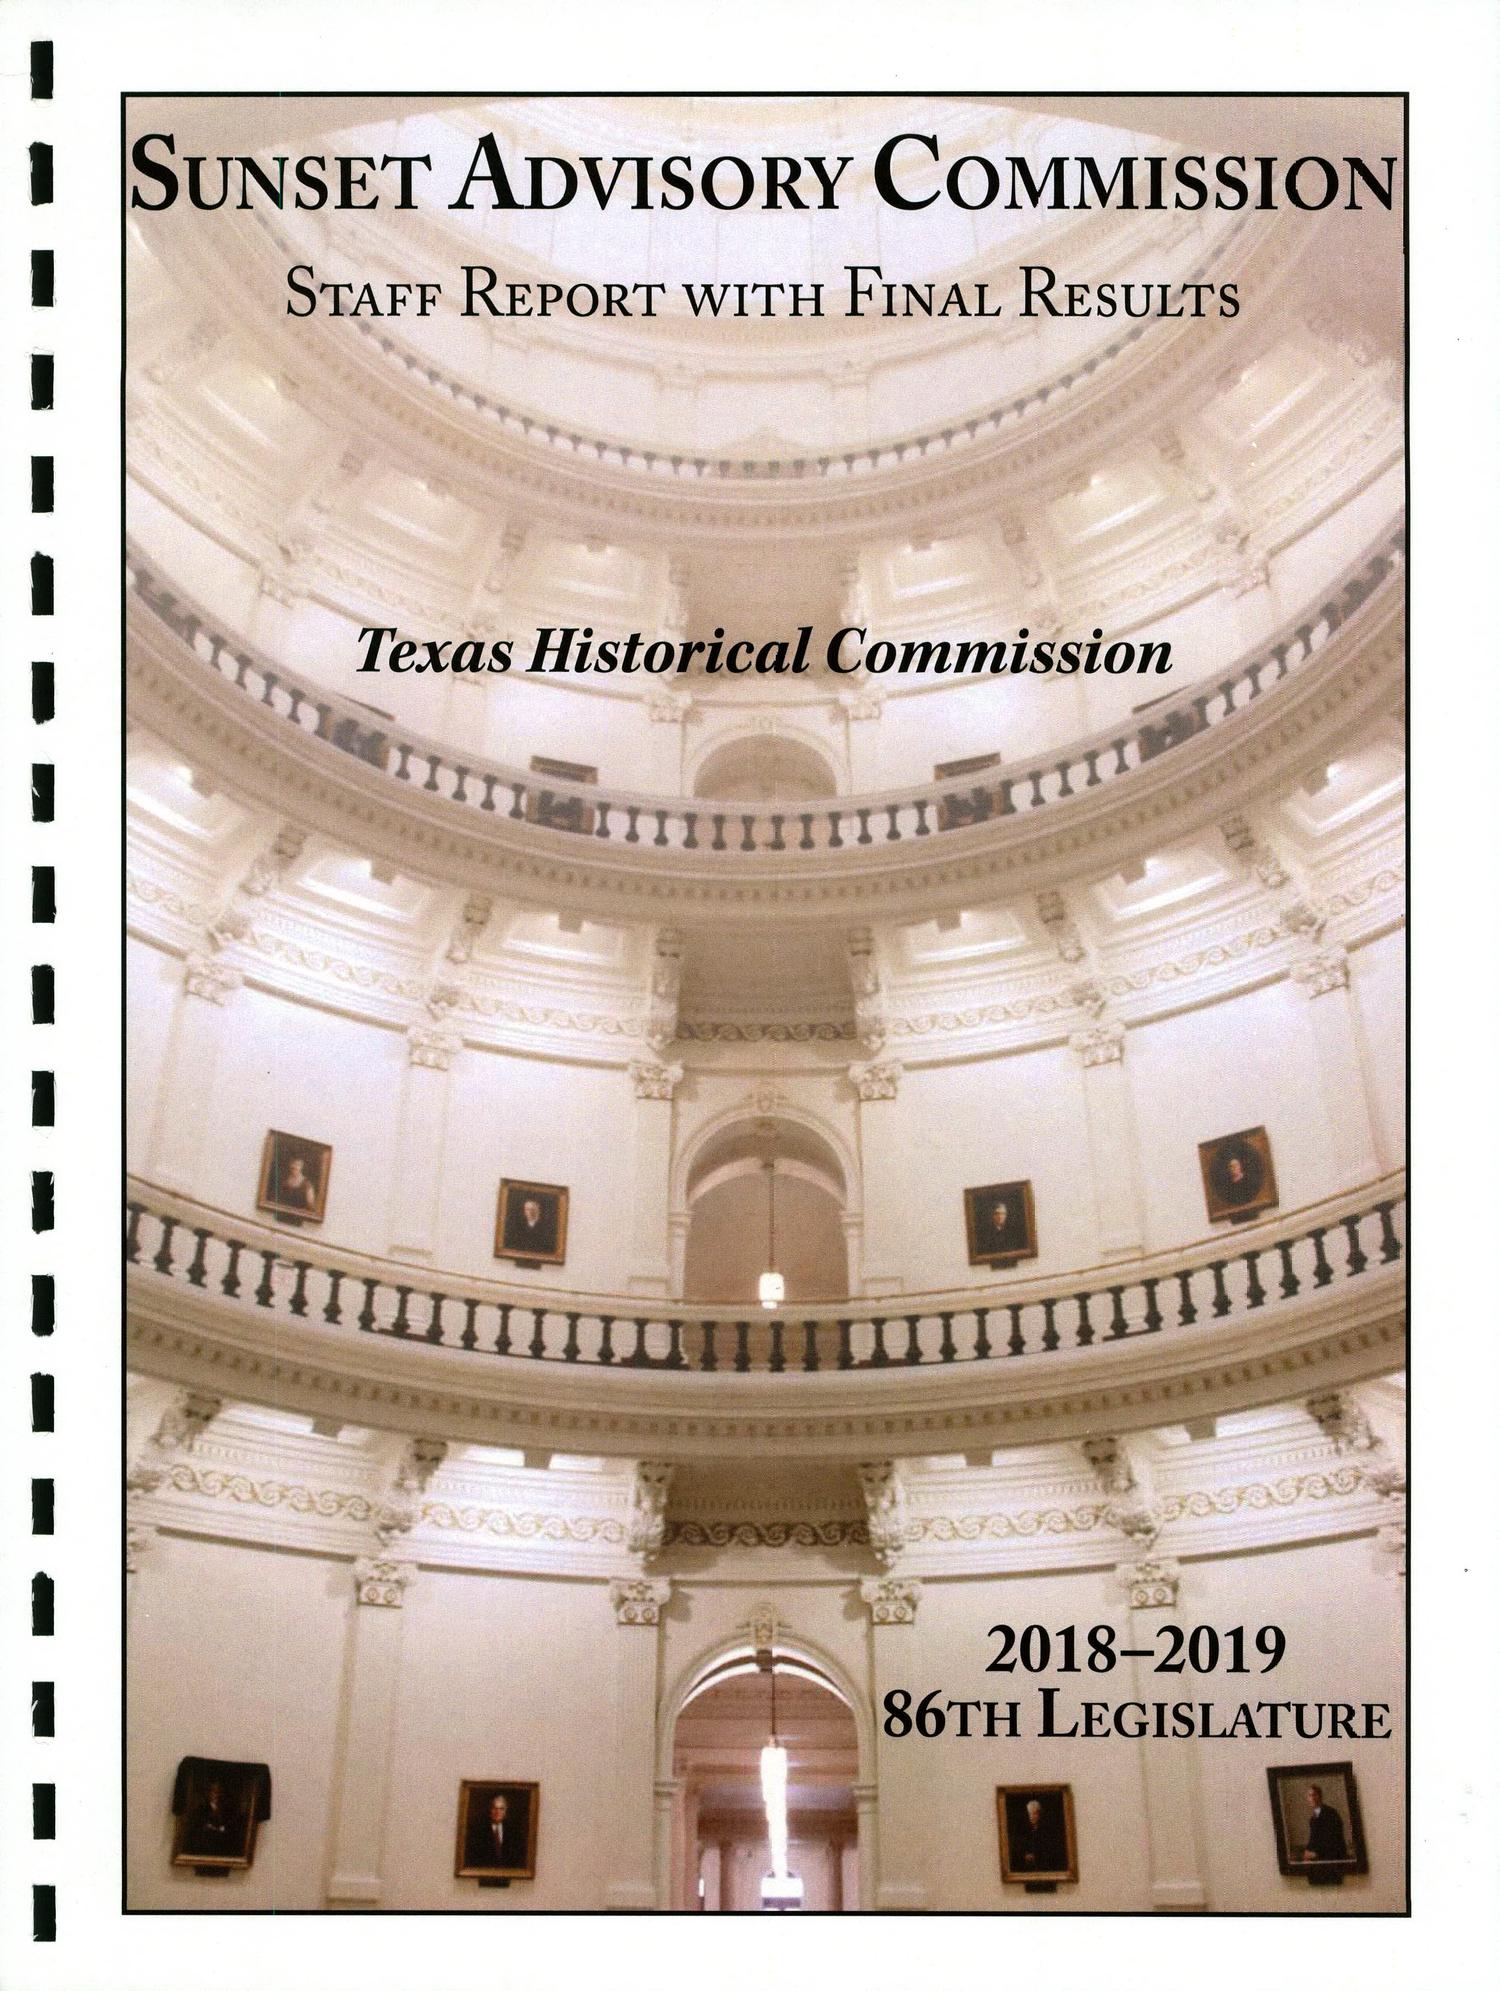 Sunset Commission Staff Report with Final Results: Texas Historical Commission
                                                
                                                    FRONT COVER
                                                